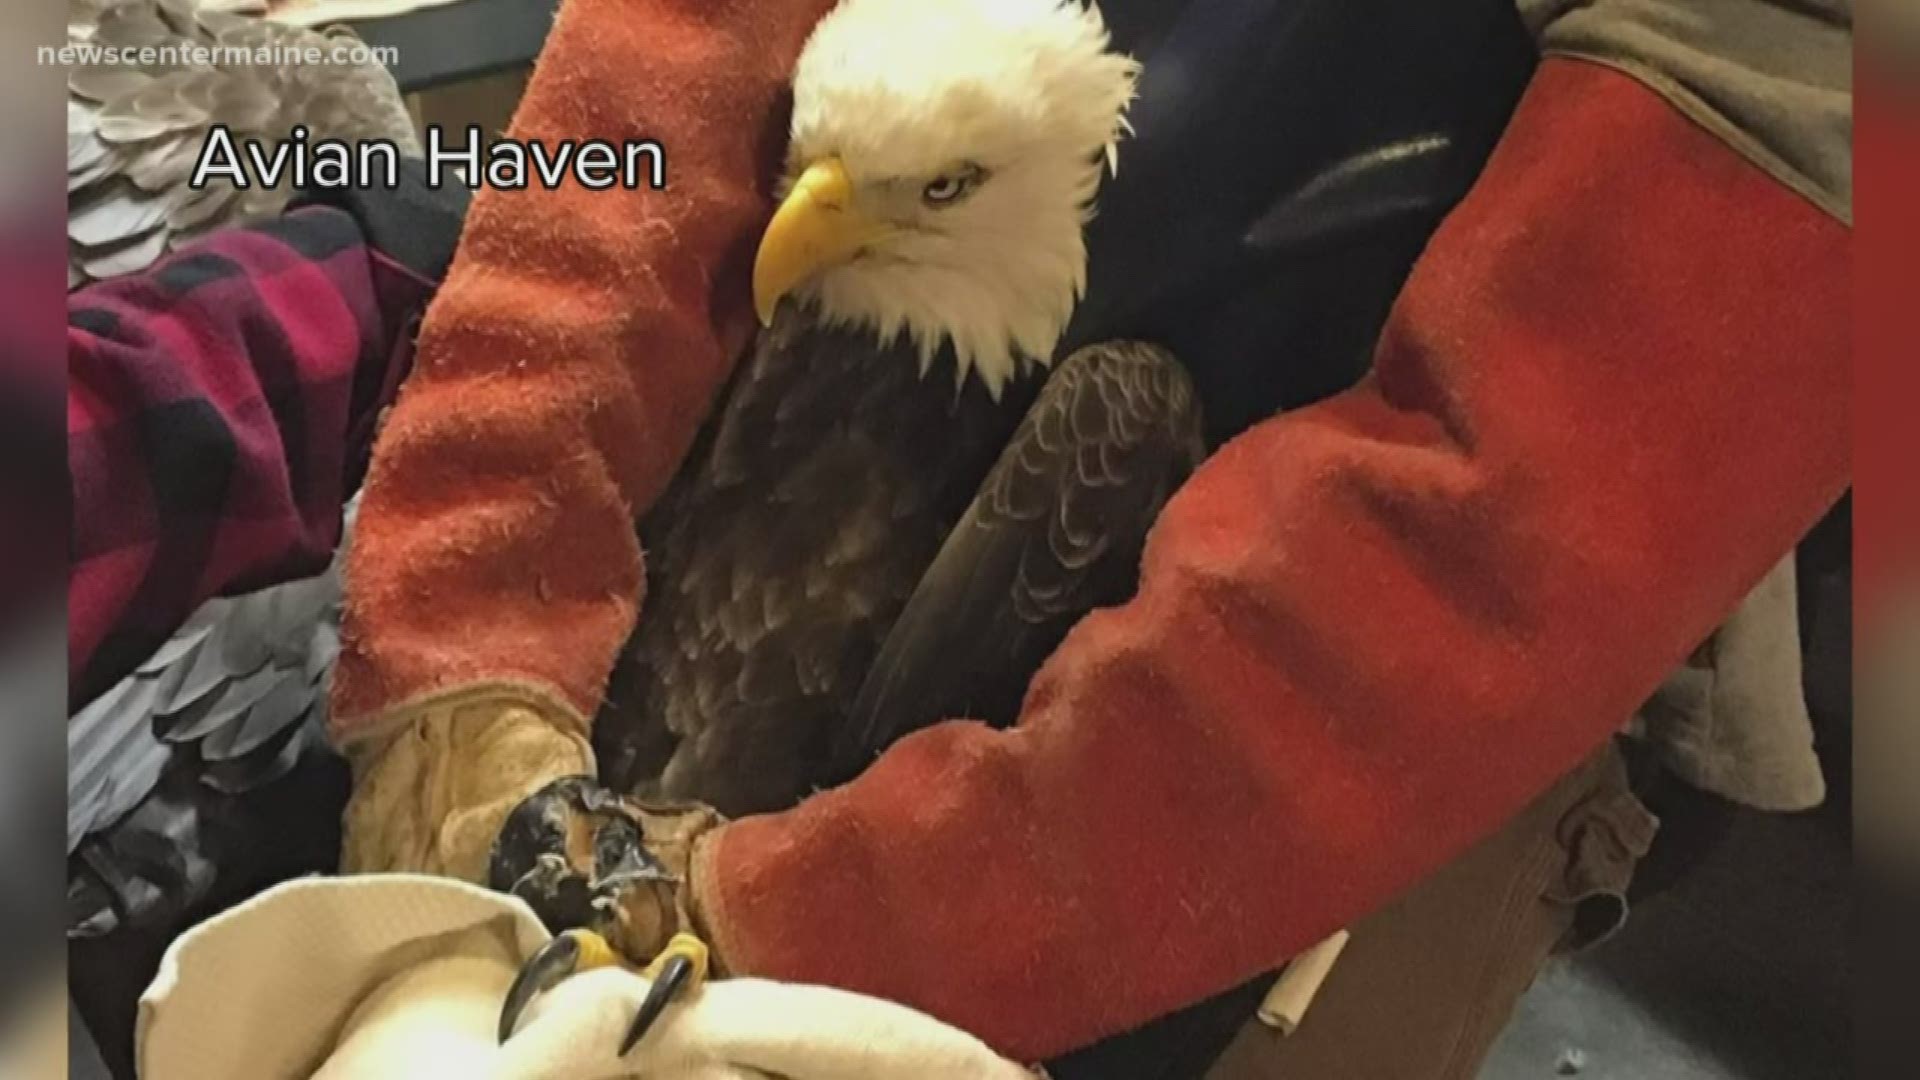 So far this year, three bald eagles have been admitted to the bird rescue Avian Haven for lead poisioning due to ingesting lead ammunition.